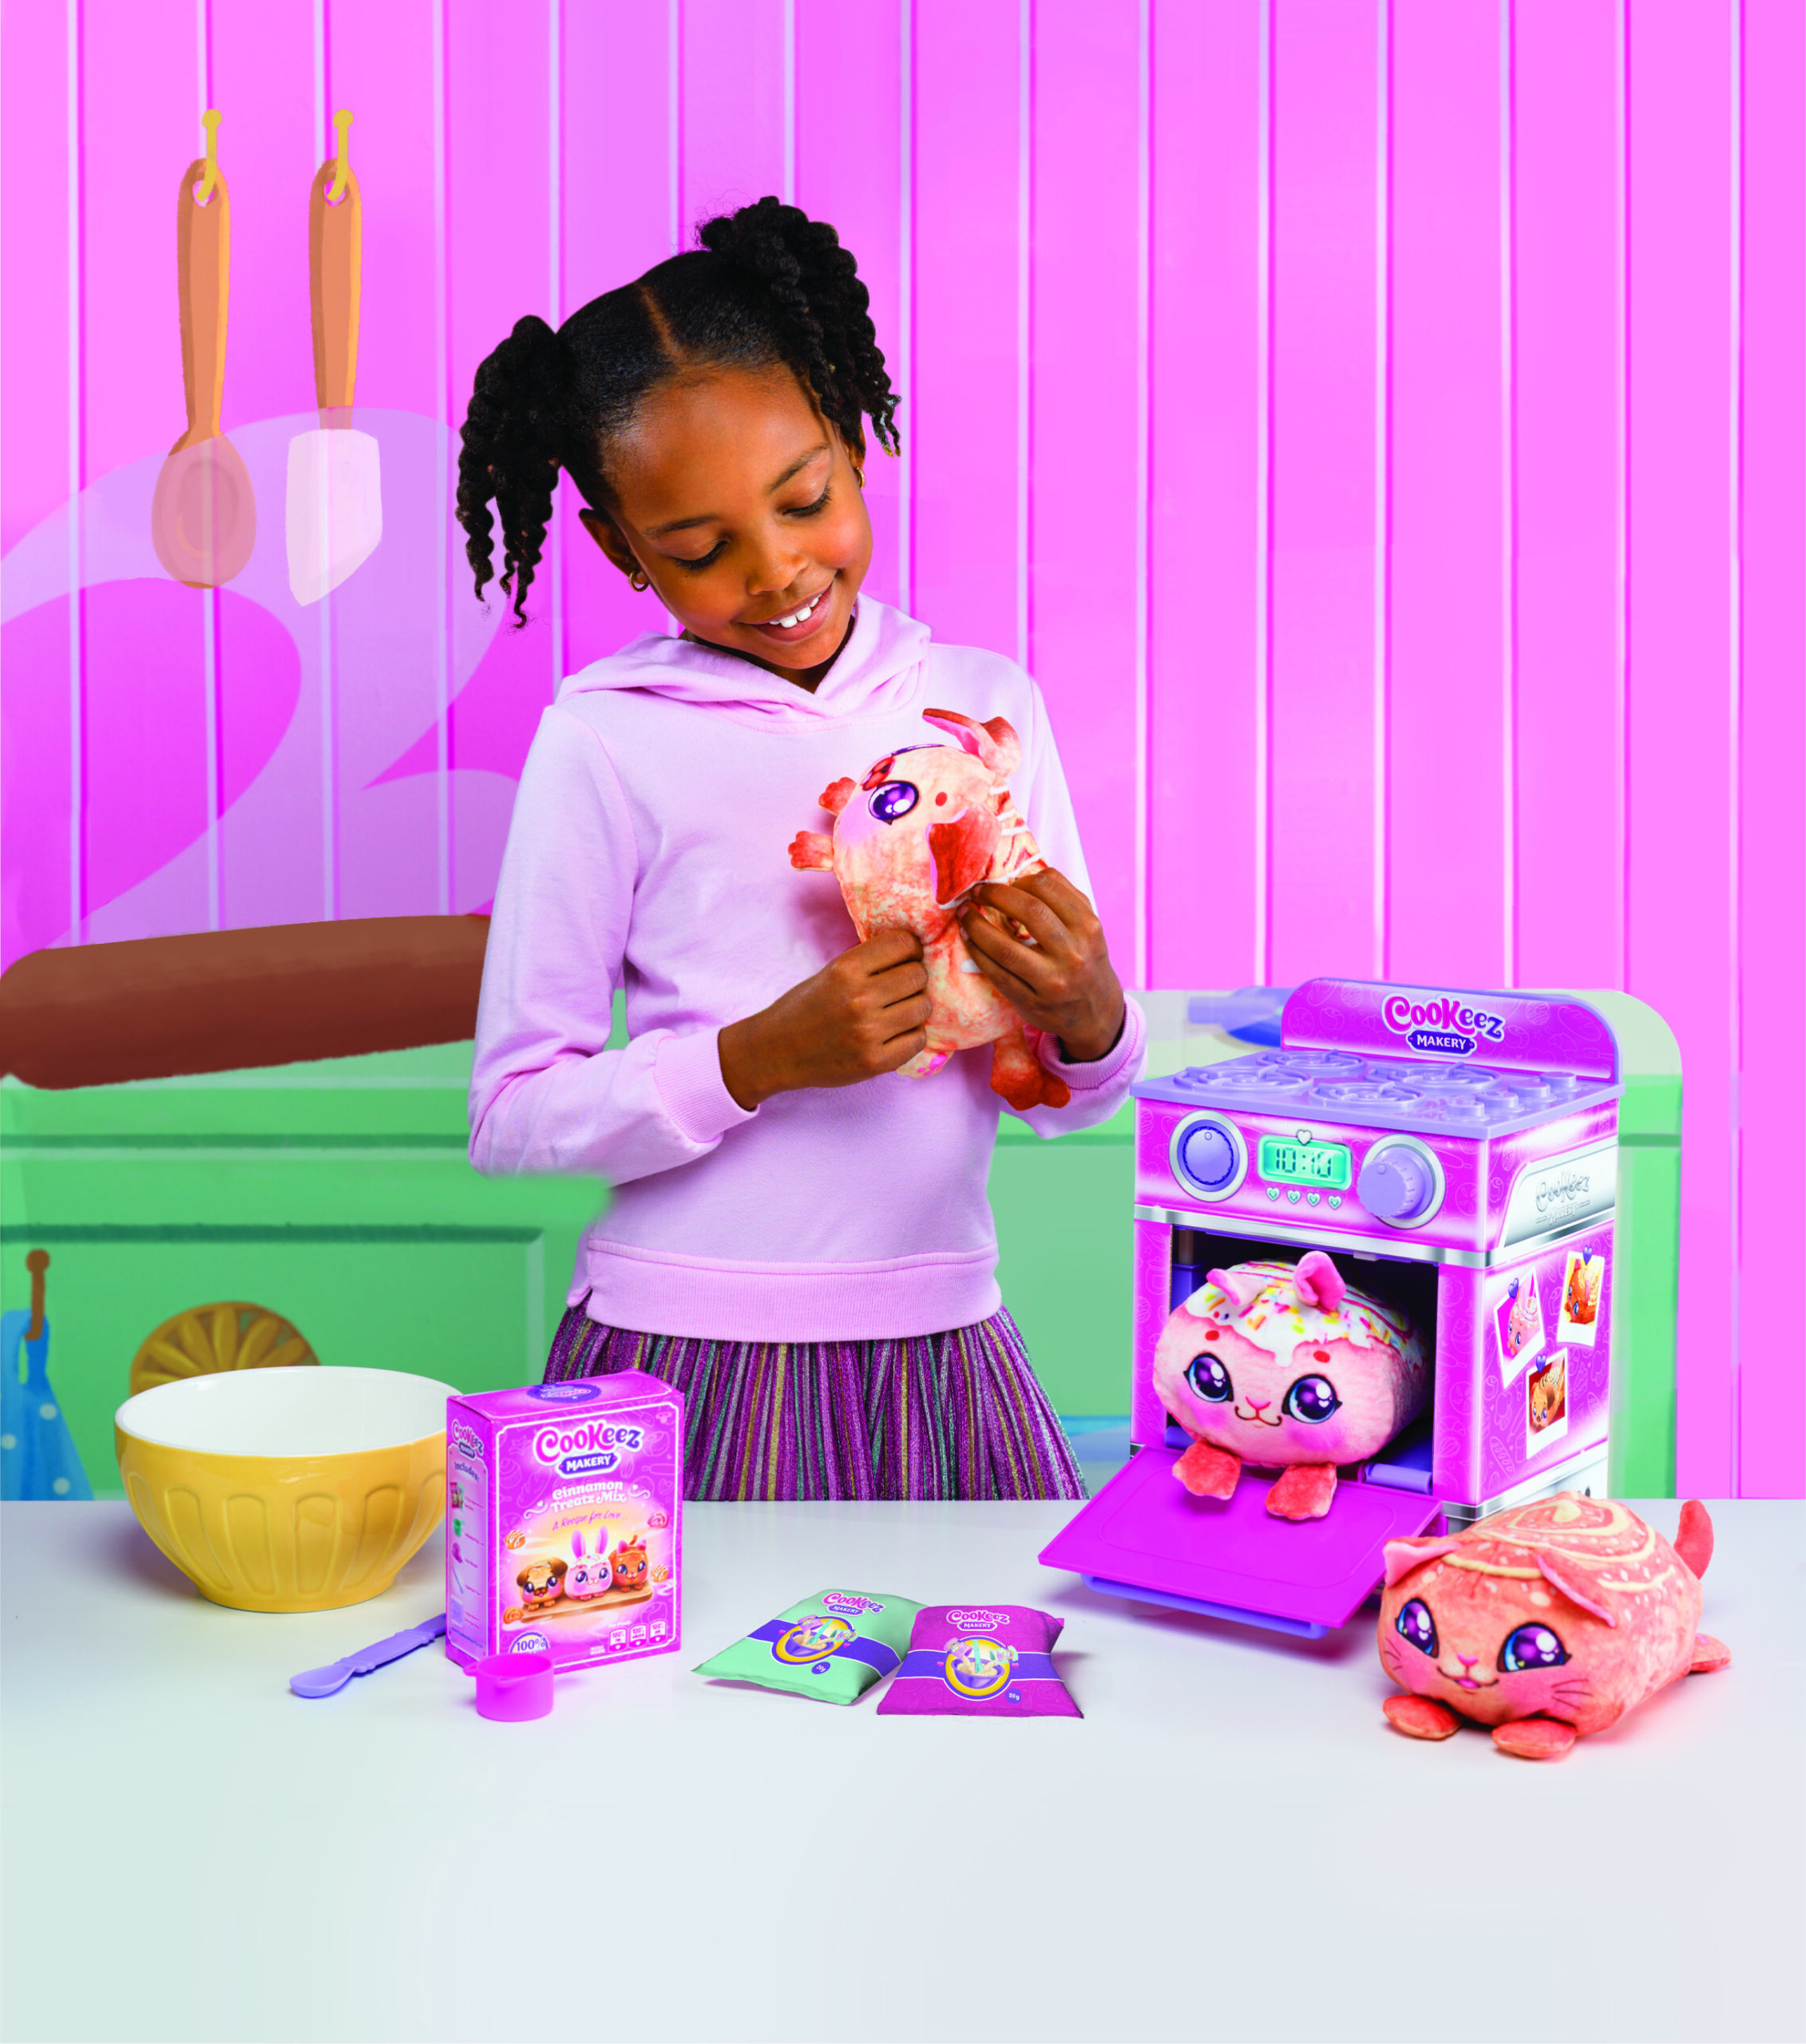 Cookeez Makery: The Ultimate 2023 Holiday Gift for Creative Kids